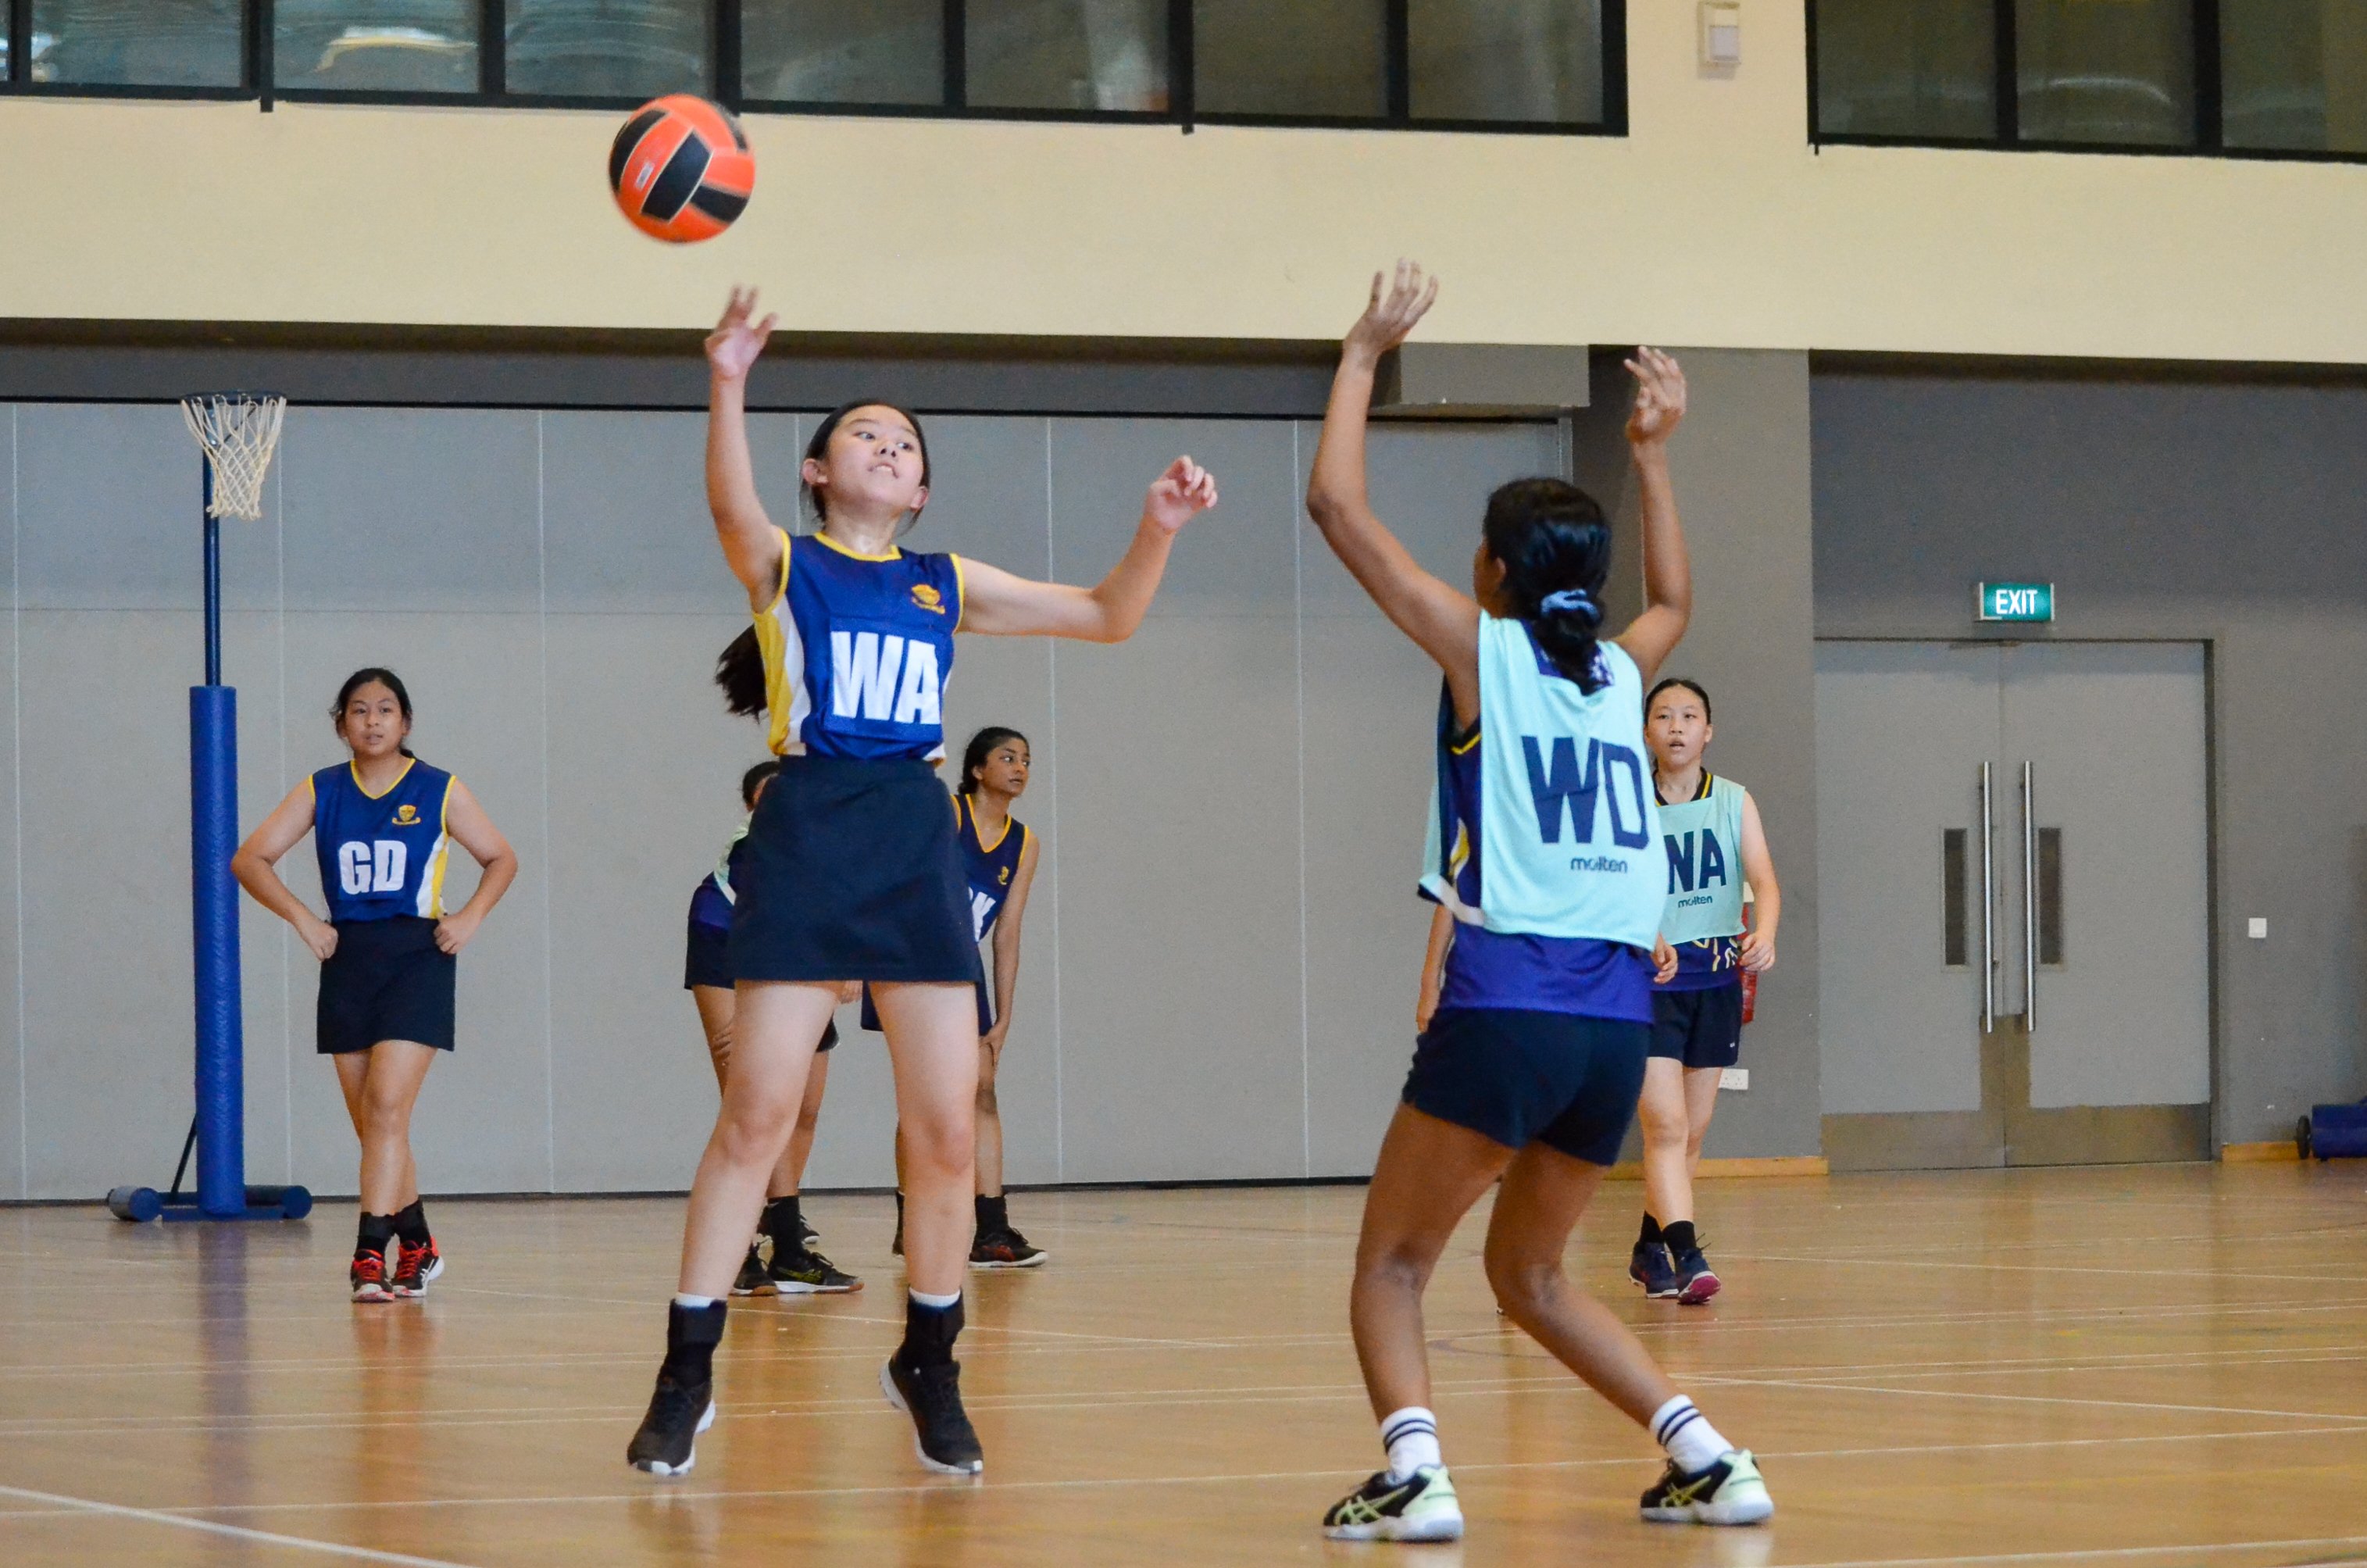 Sch-East-B Div Netball TNVictorNg-MGS-Gracie-one-on-one-with defender.NB50